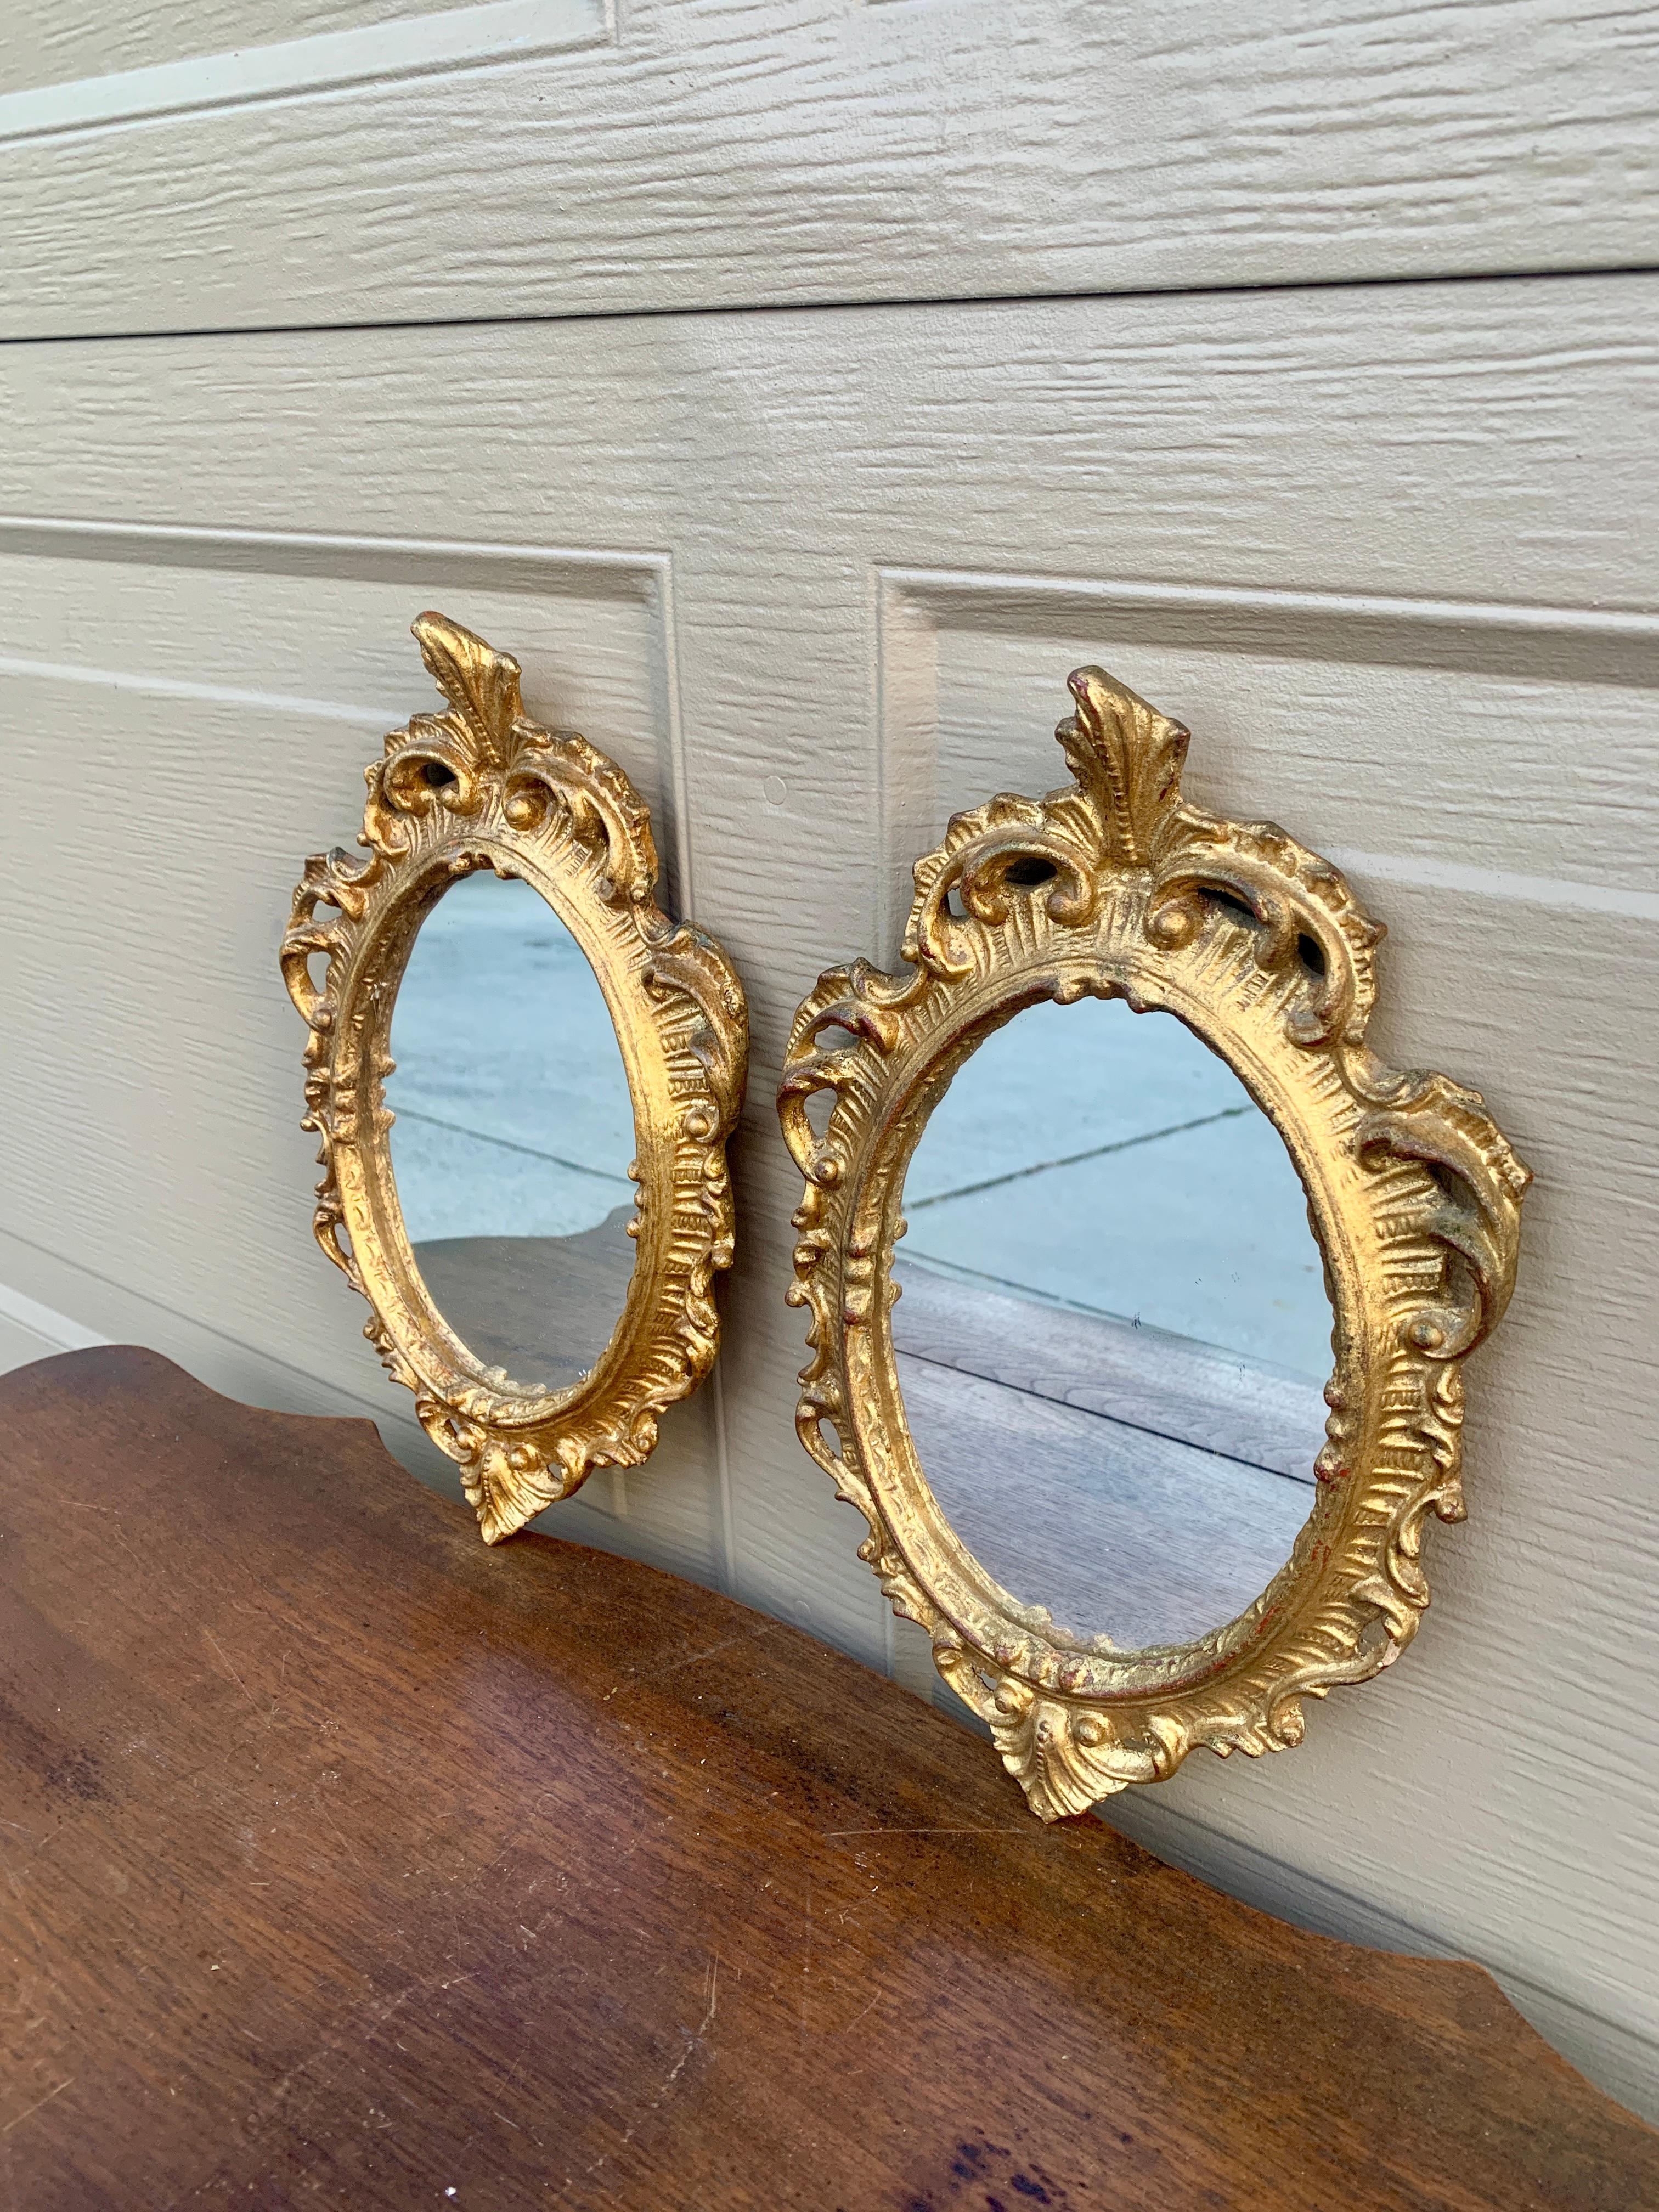 A stunning pair of Italian Florentine baroque rococo style wall mirrors

Italy, Circa 1960s

Gold gilt wood, with mirror.

Measures: 7.25